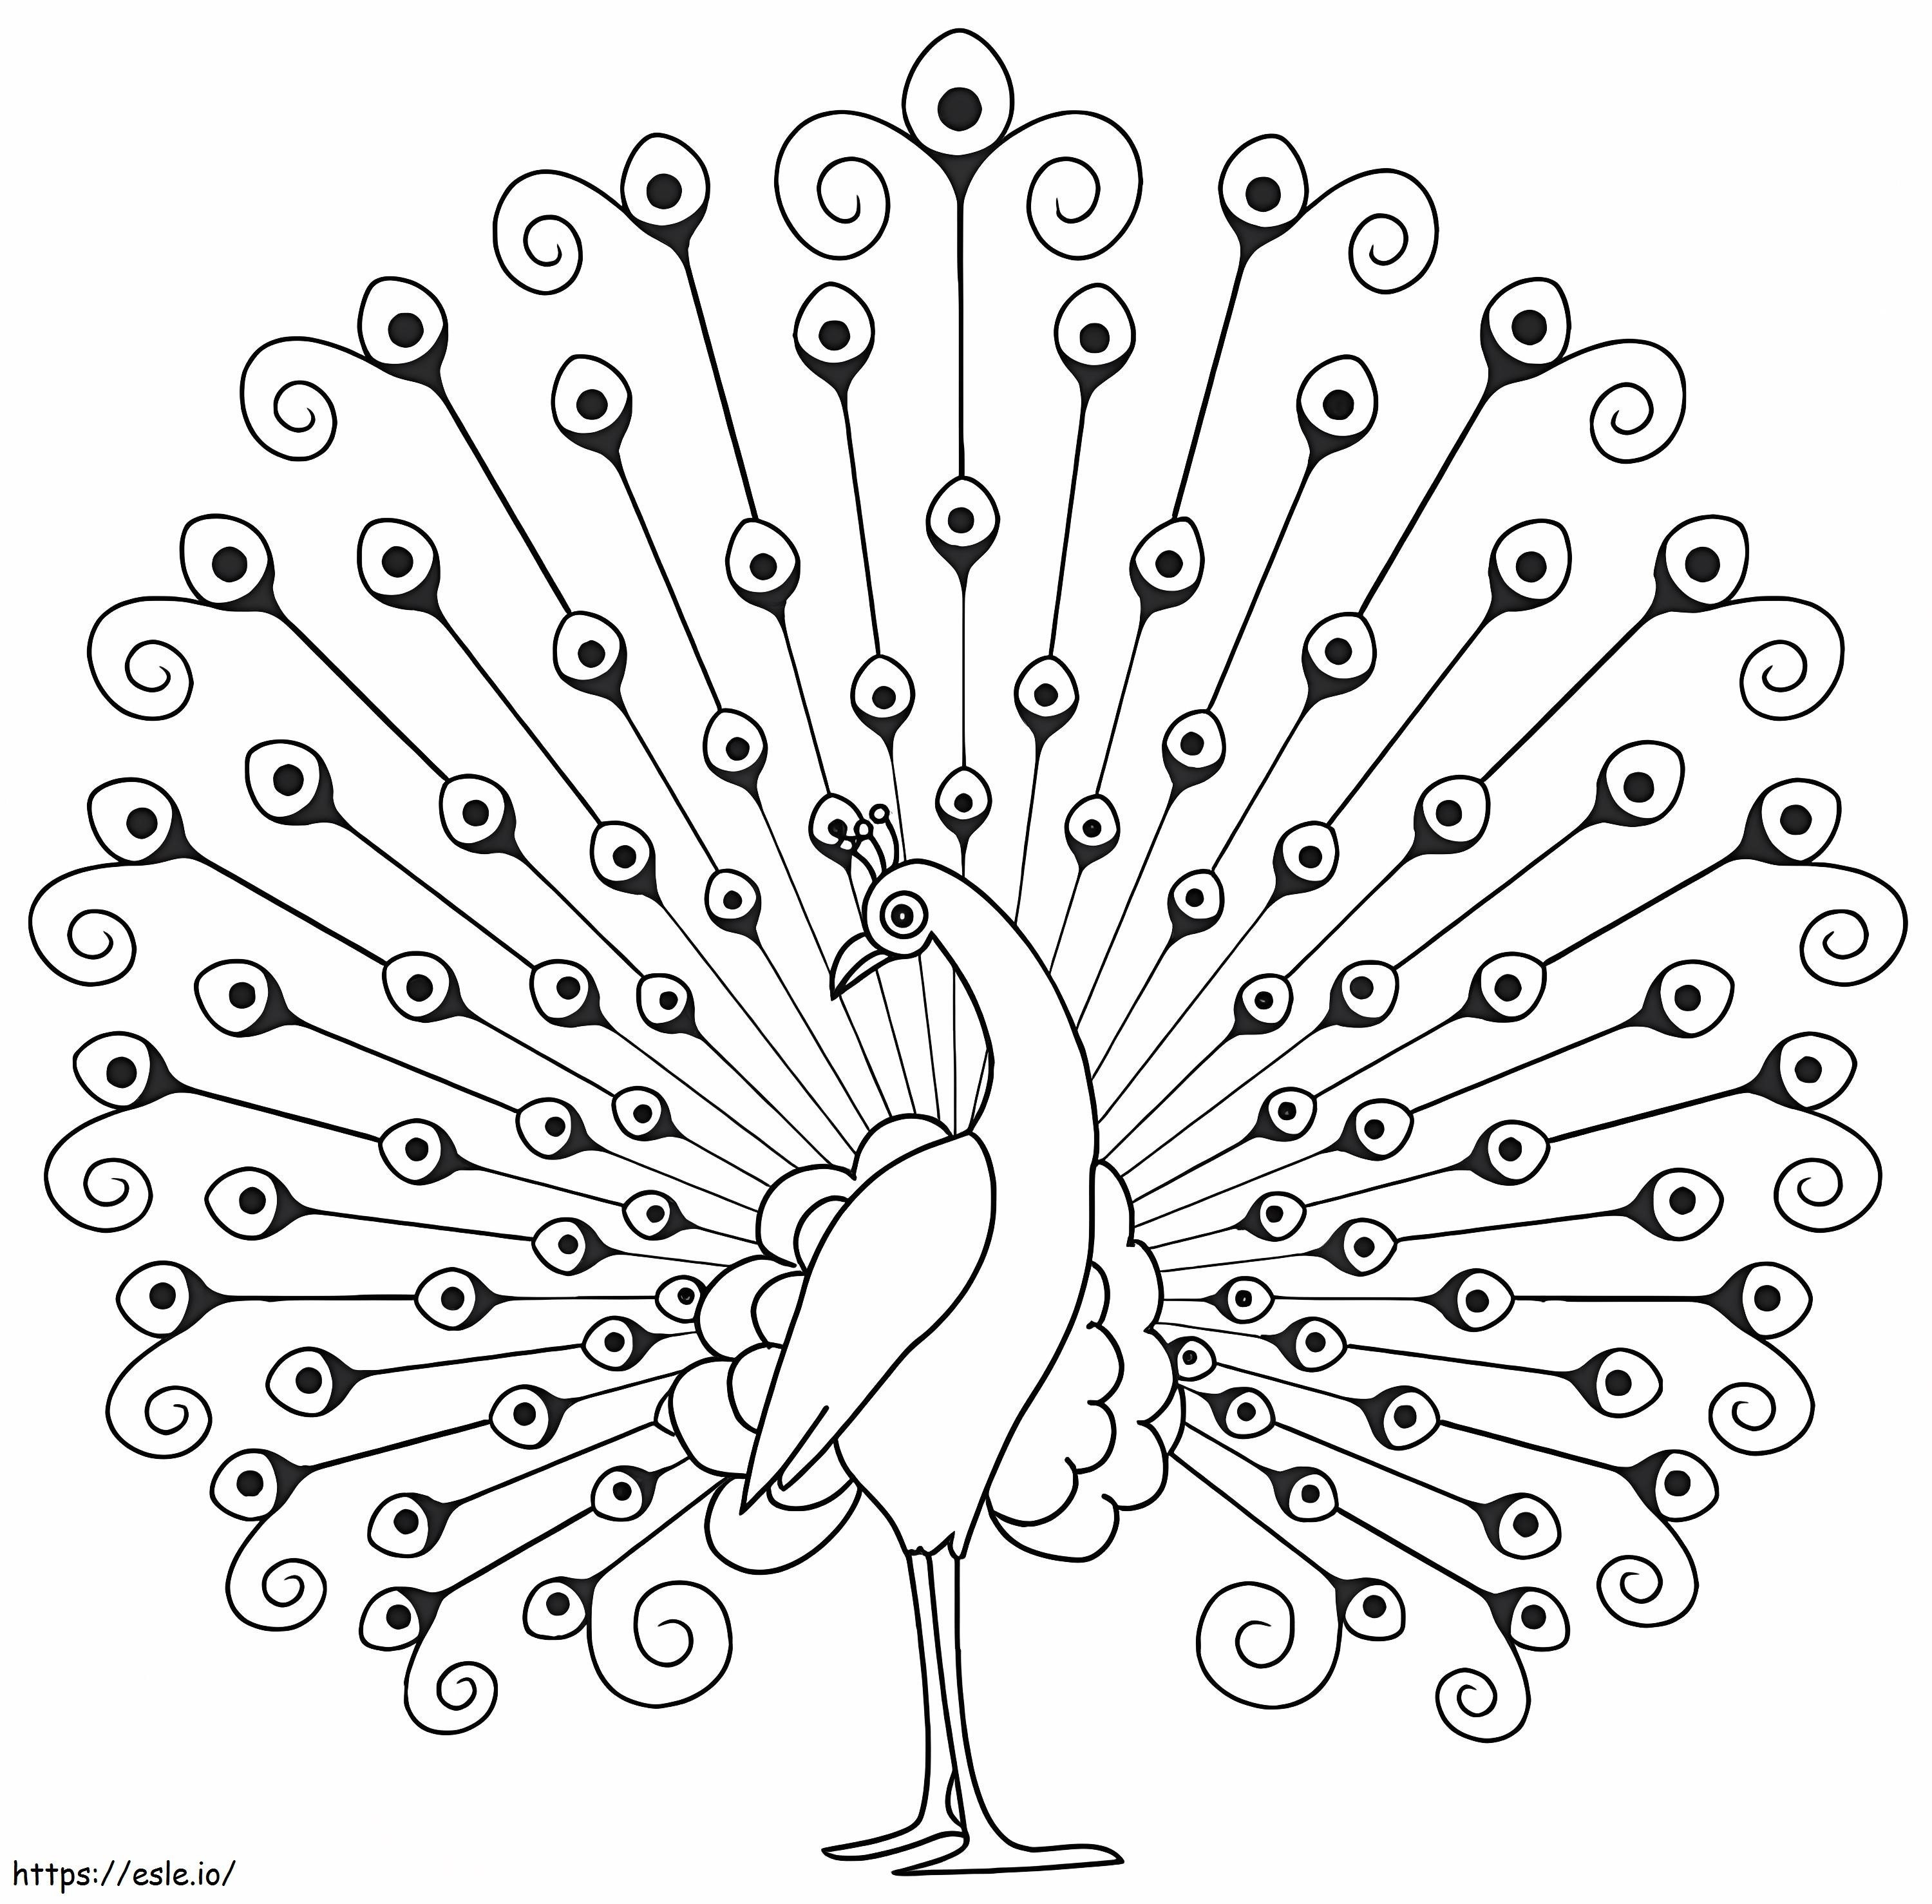 Basic Peacock coloring page